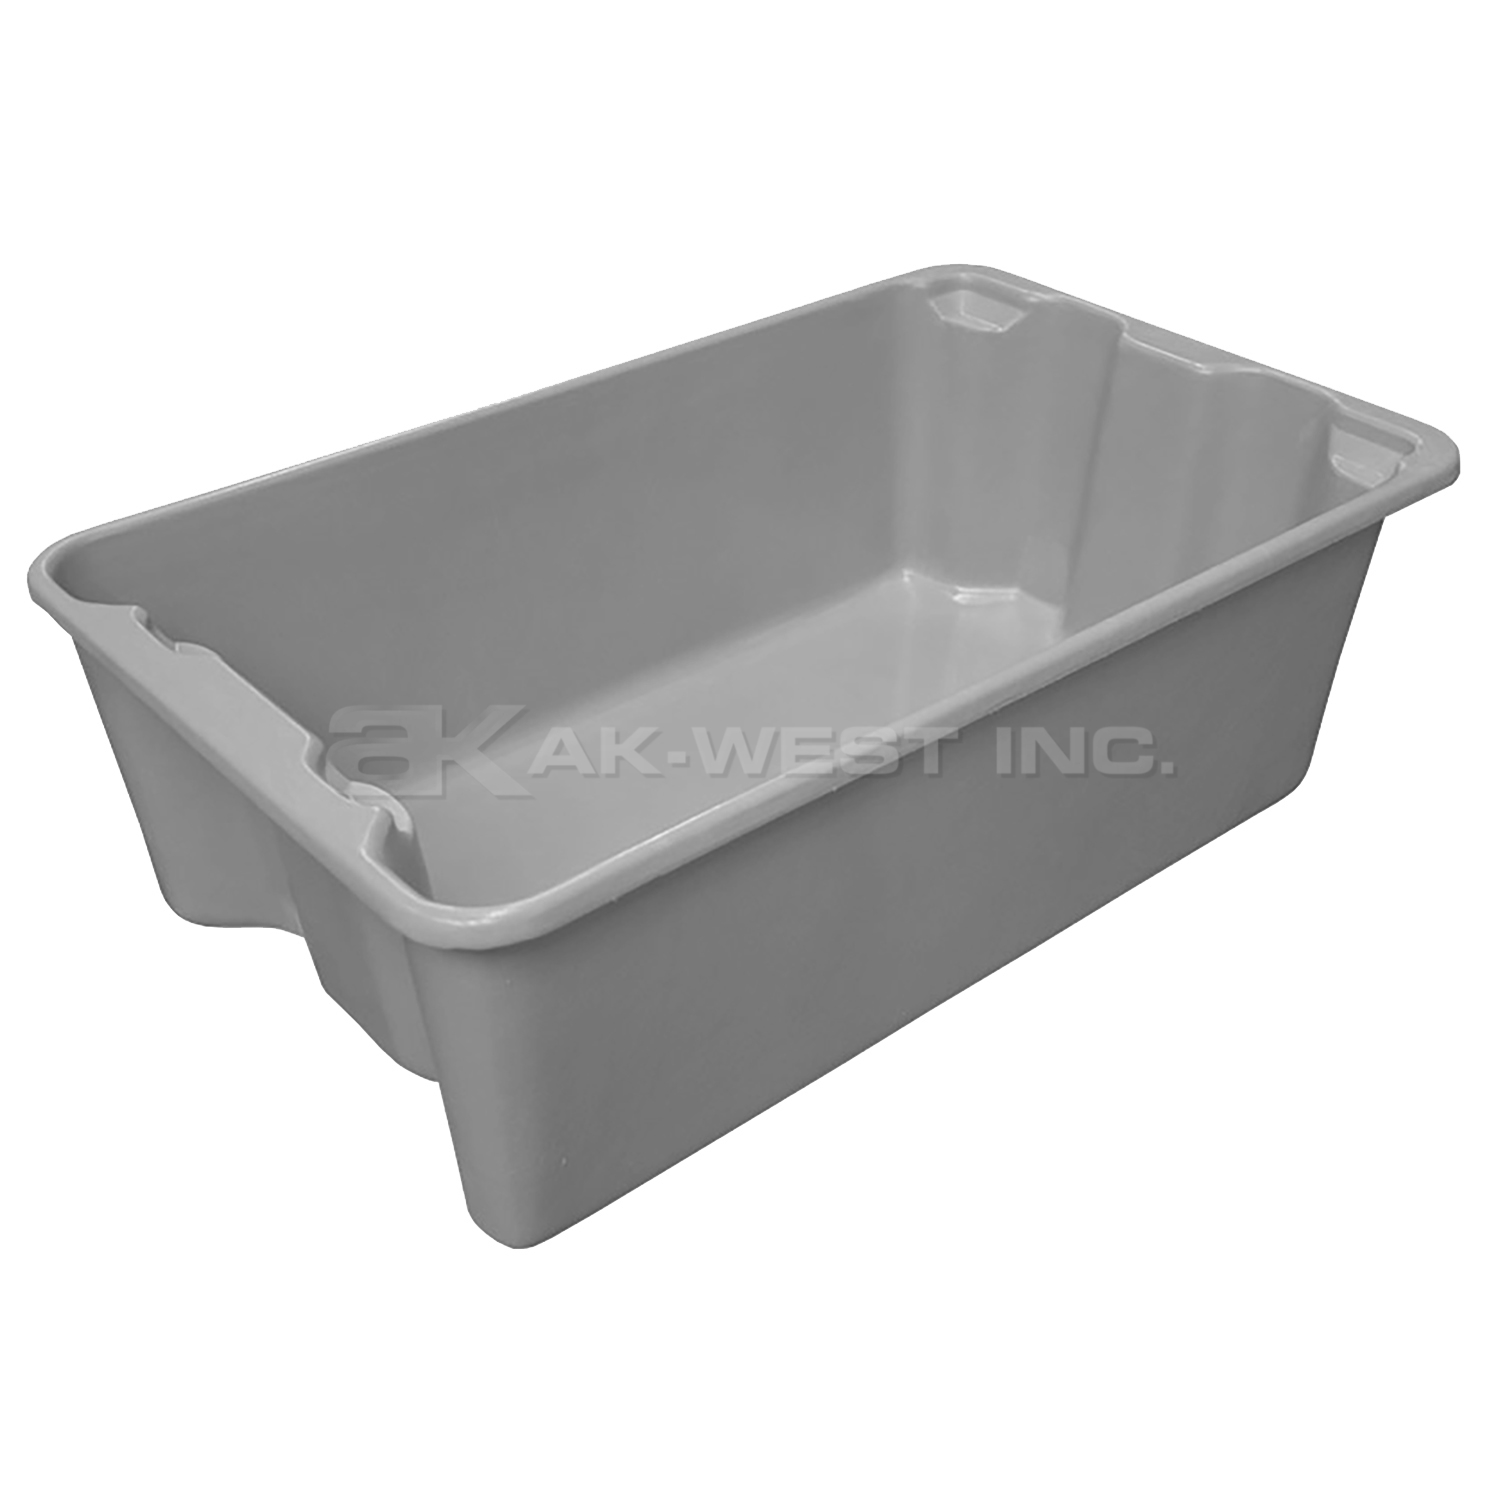 Grey, 24-1/4"L x 14-3/4"W x 8"H, Fiberglass Reinforced Stack and Nest Container